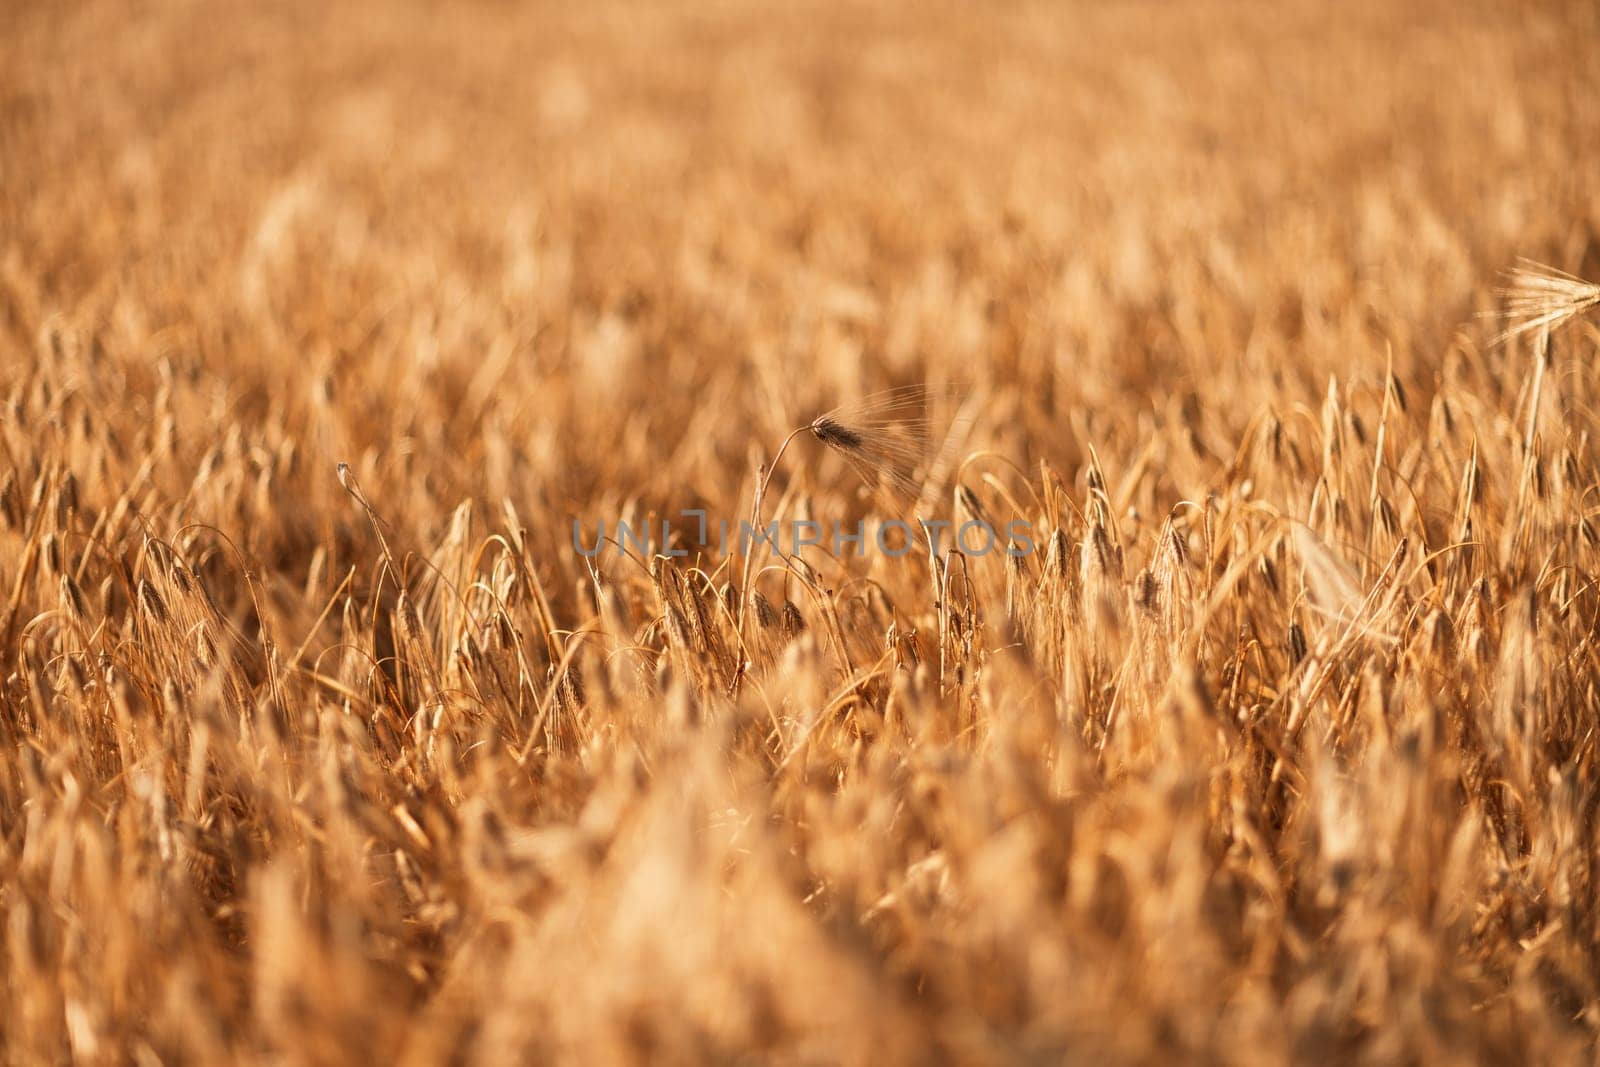 A field of tall, dry grass with a few weeds in it. Scene is somewhat desolate and barren, with the dry grass. by Matiunina